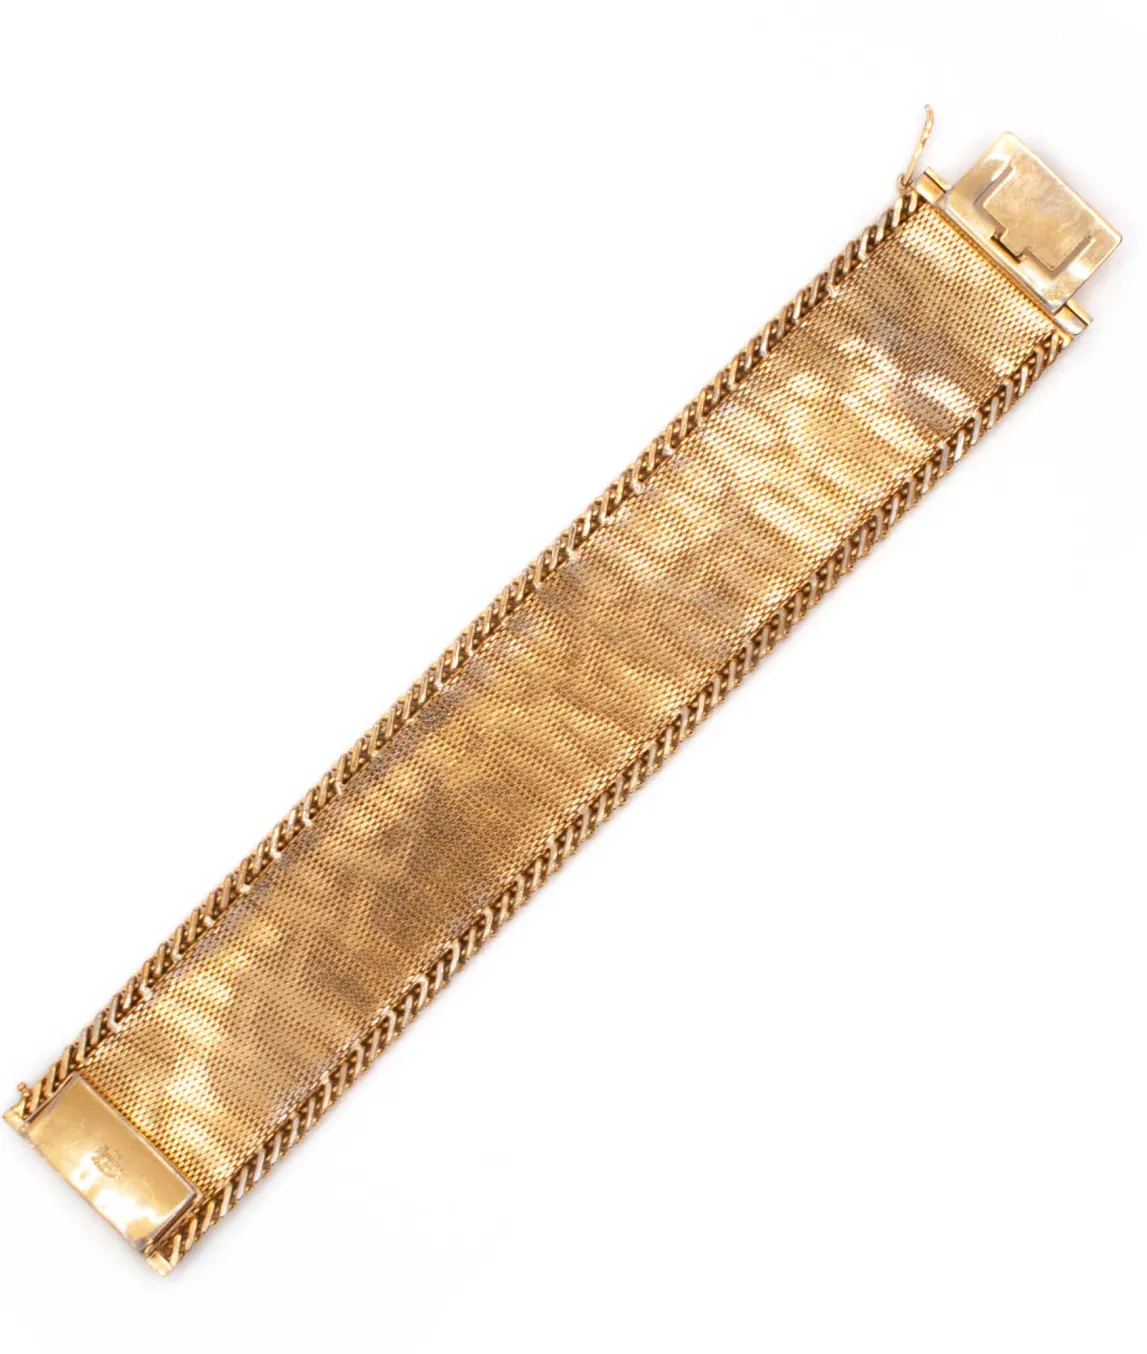 Interior of woven gold plated bracelet by Grosse